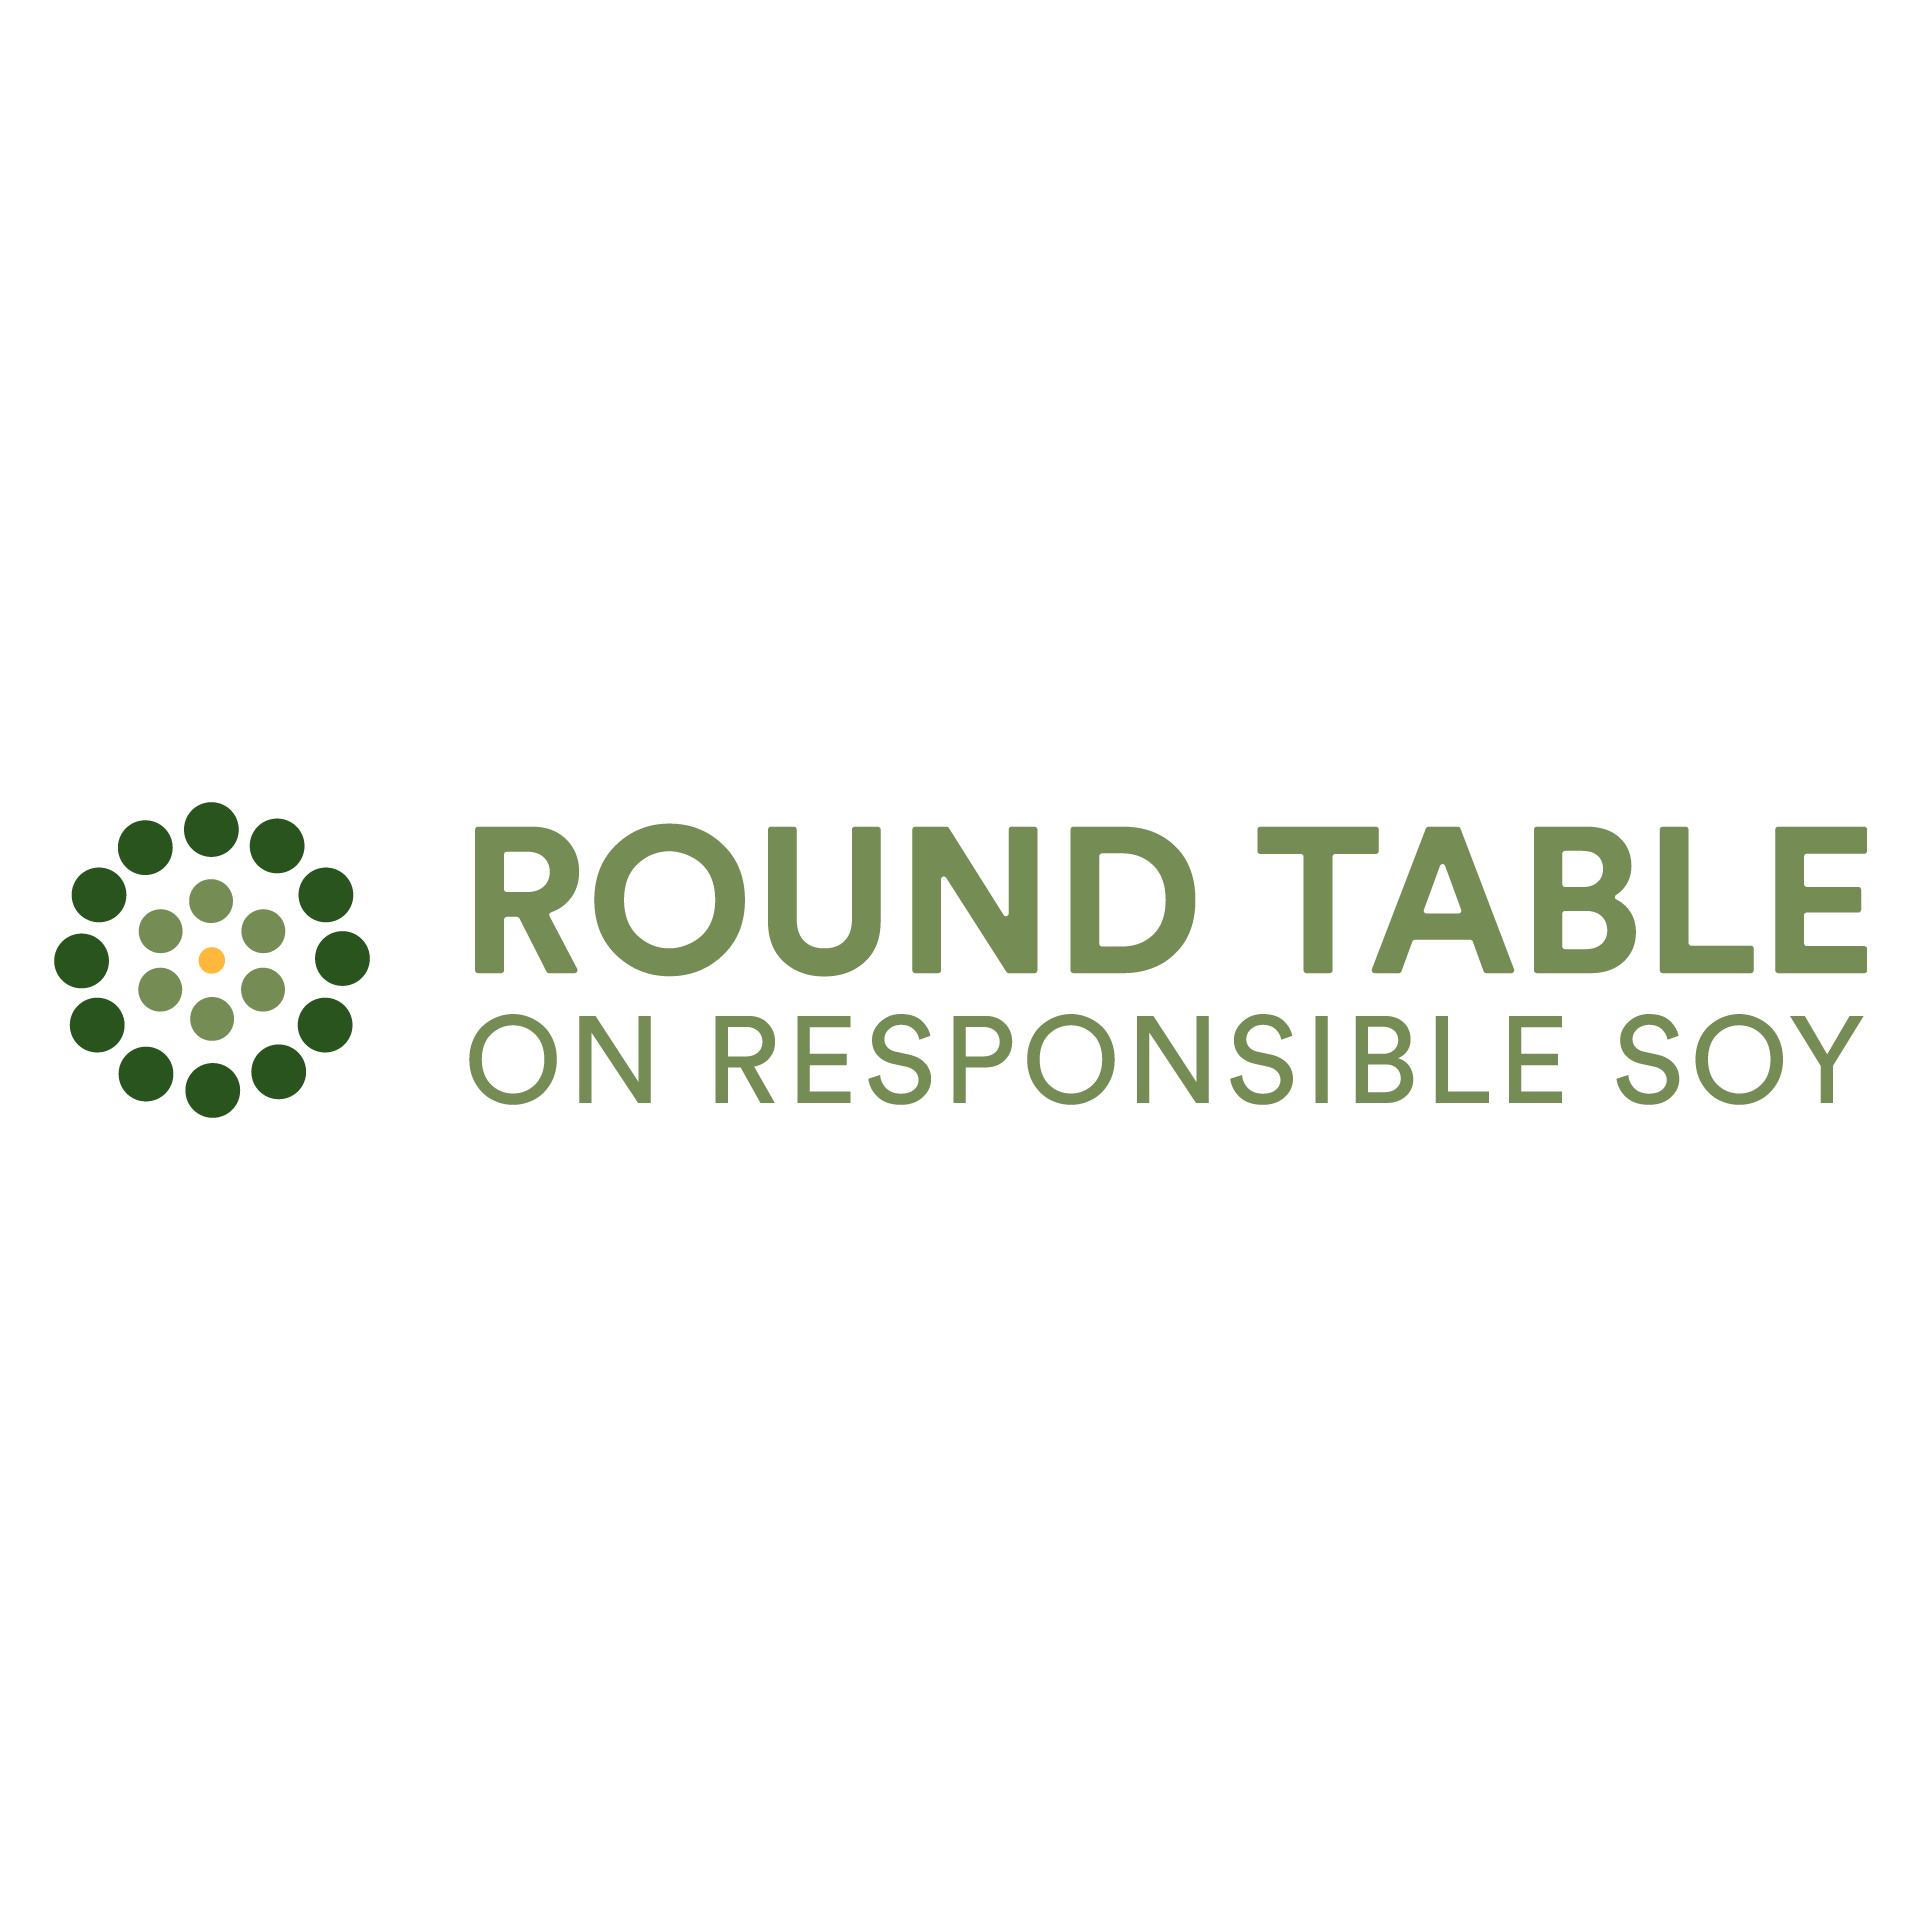 RTRS - Round Table on Responsible Soy